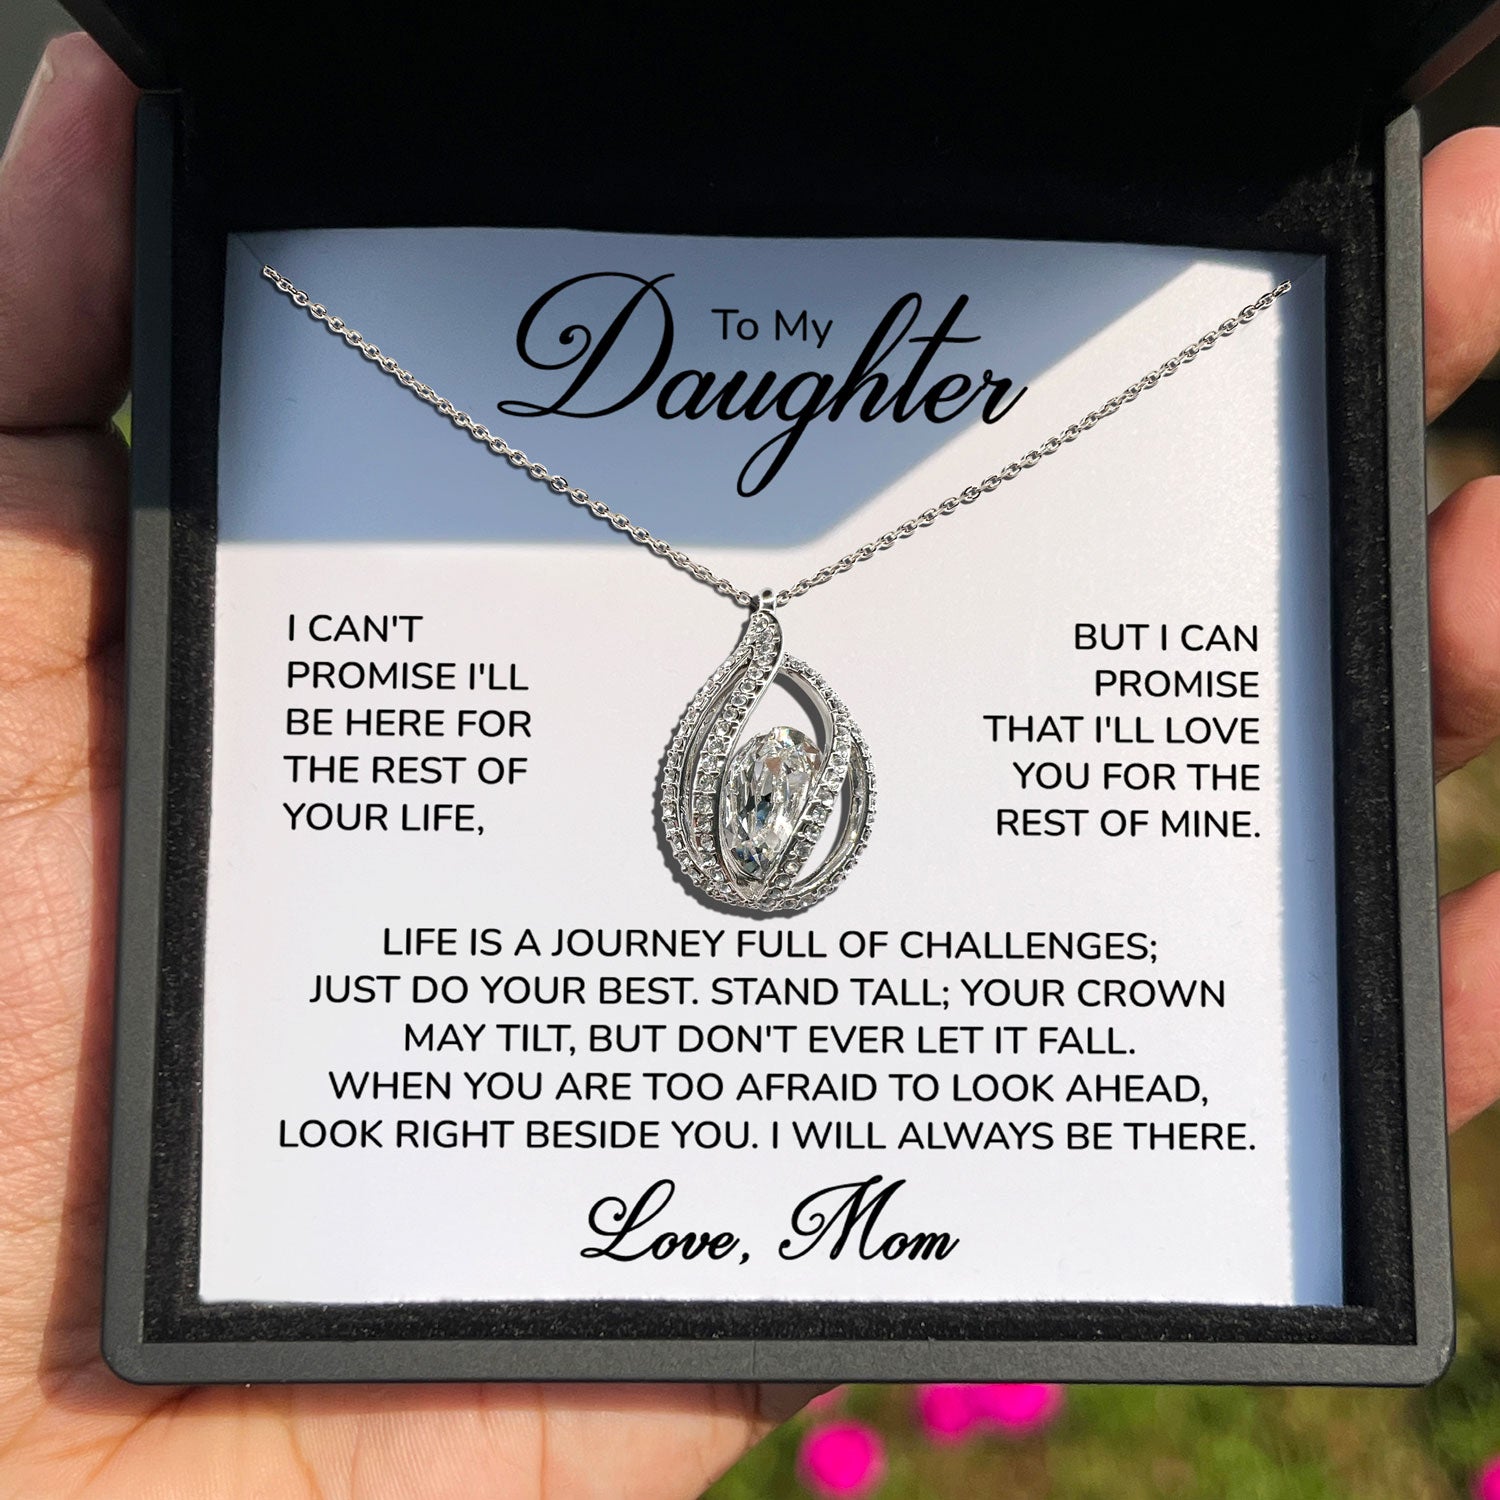 To My Daughter - I Will Always Be There - Orbital Birdcage Necklace